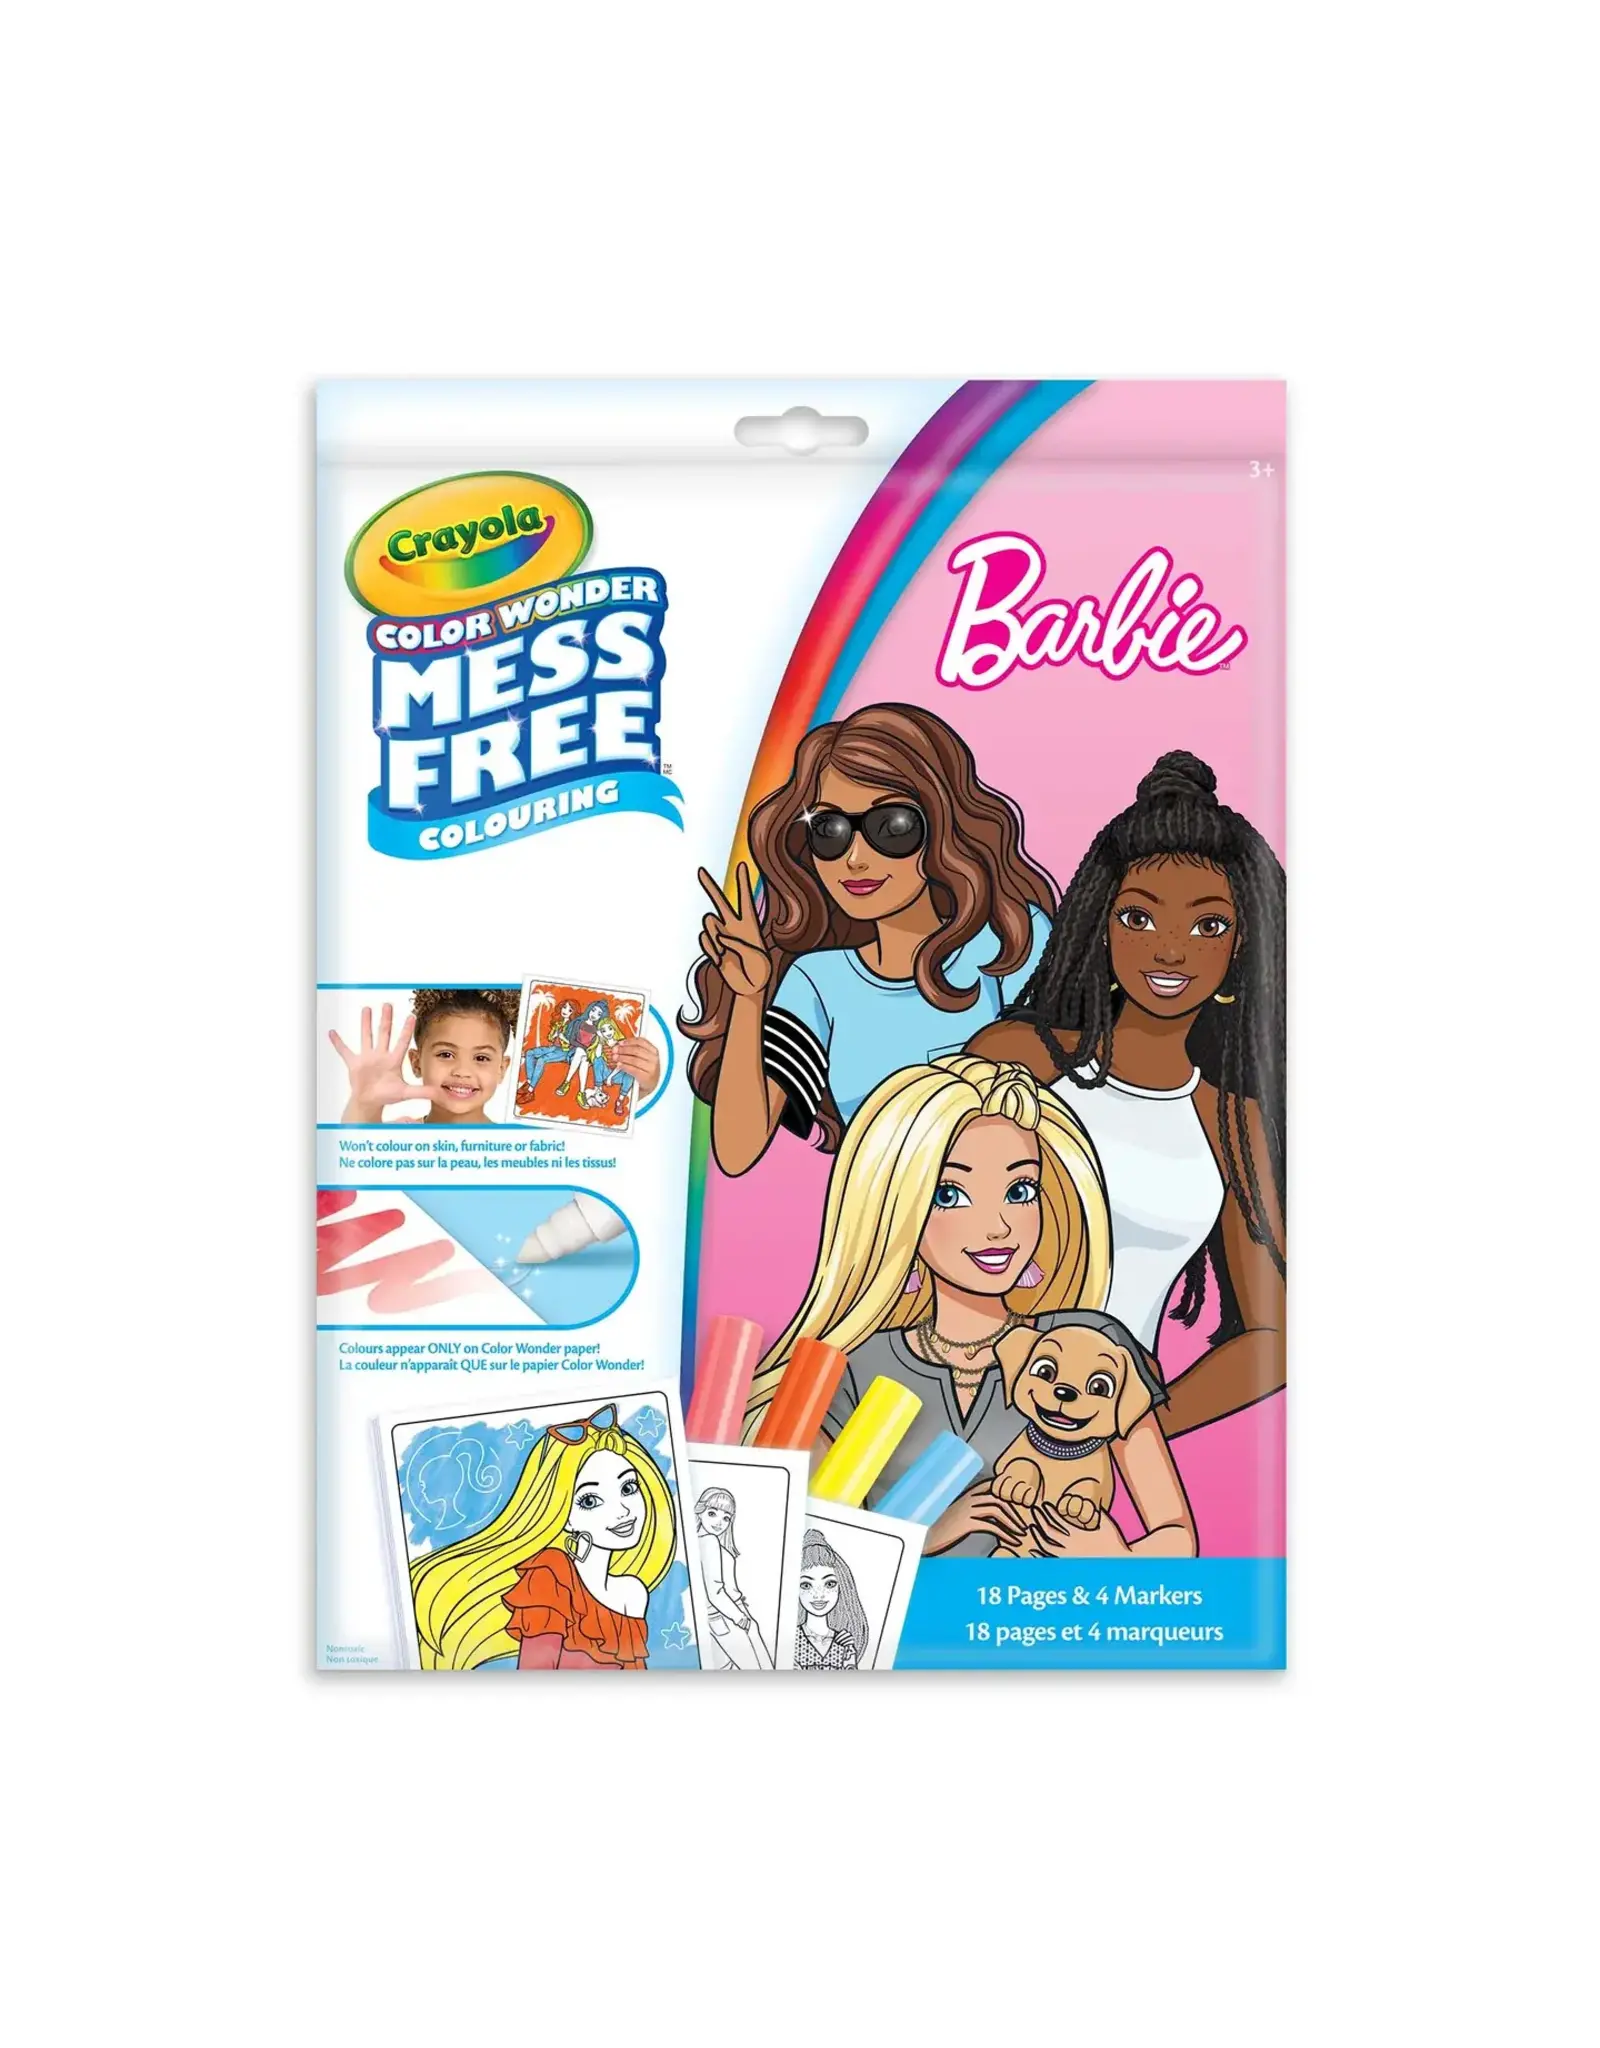 Crayola Crayola Barbie Color Wonder Mess-Free Colouring Pages & Mini Markers